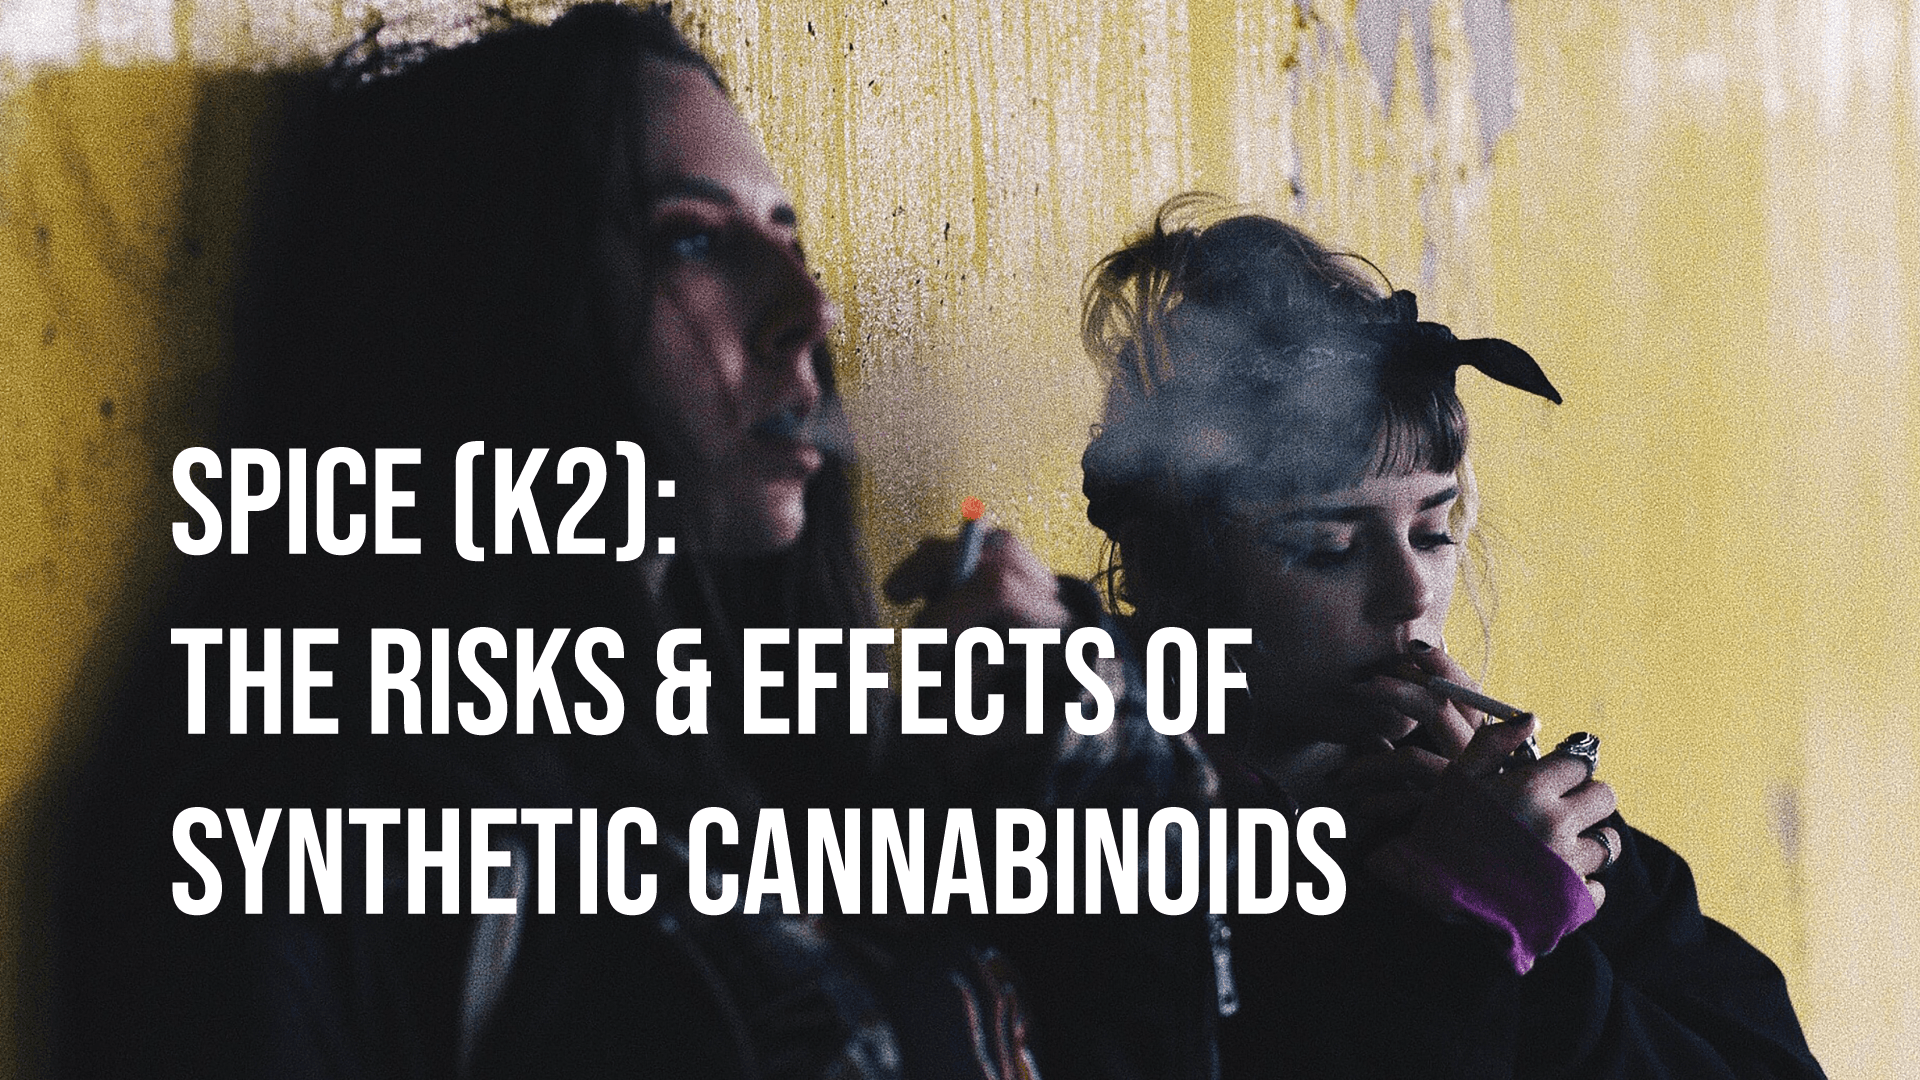 Spice (K2): The Risks and Effects of Synthetic Cannabinoids